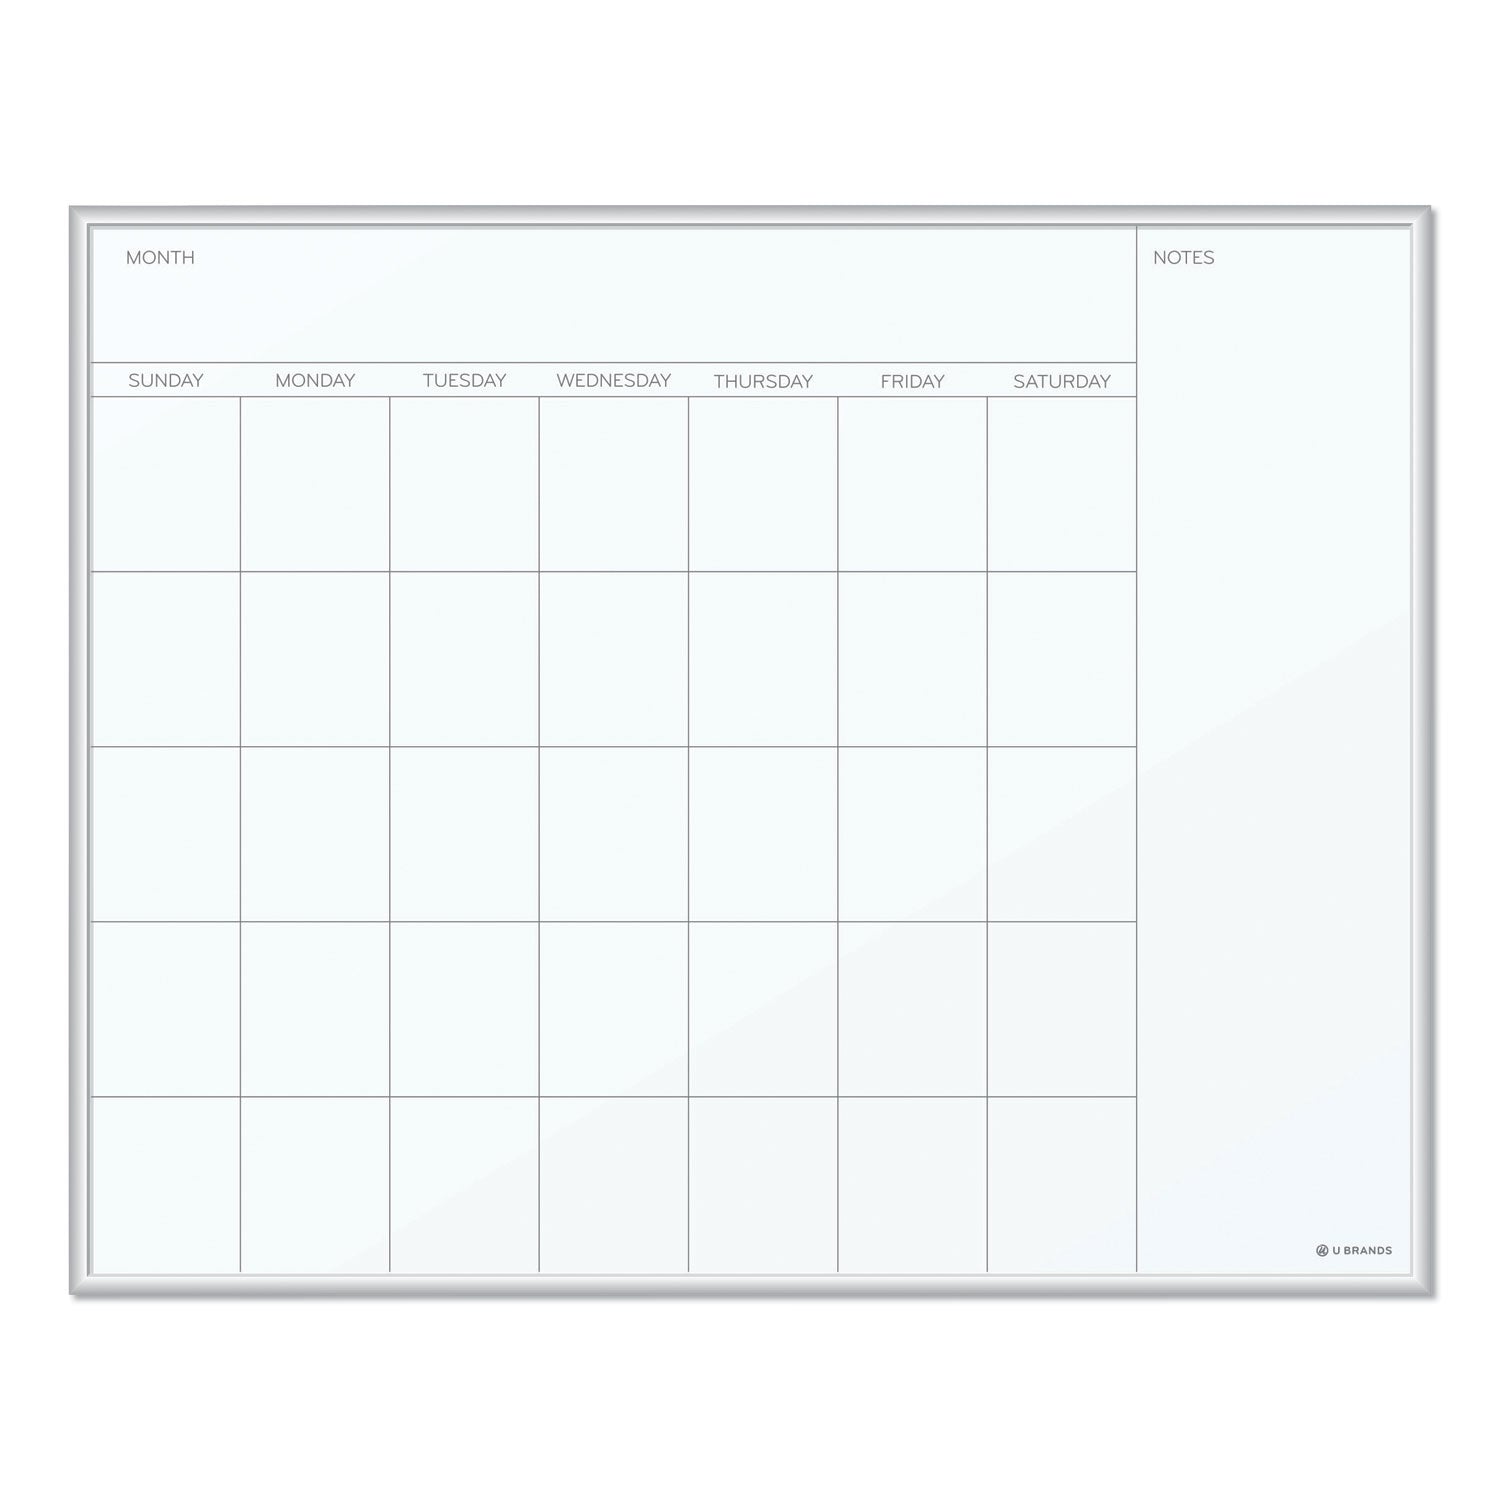 magnetic-dry-erase-board-undated-one-month-20-x-16-white-surface-silver-aluminum-frame_ubr361u0001 - 1